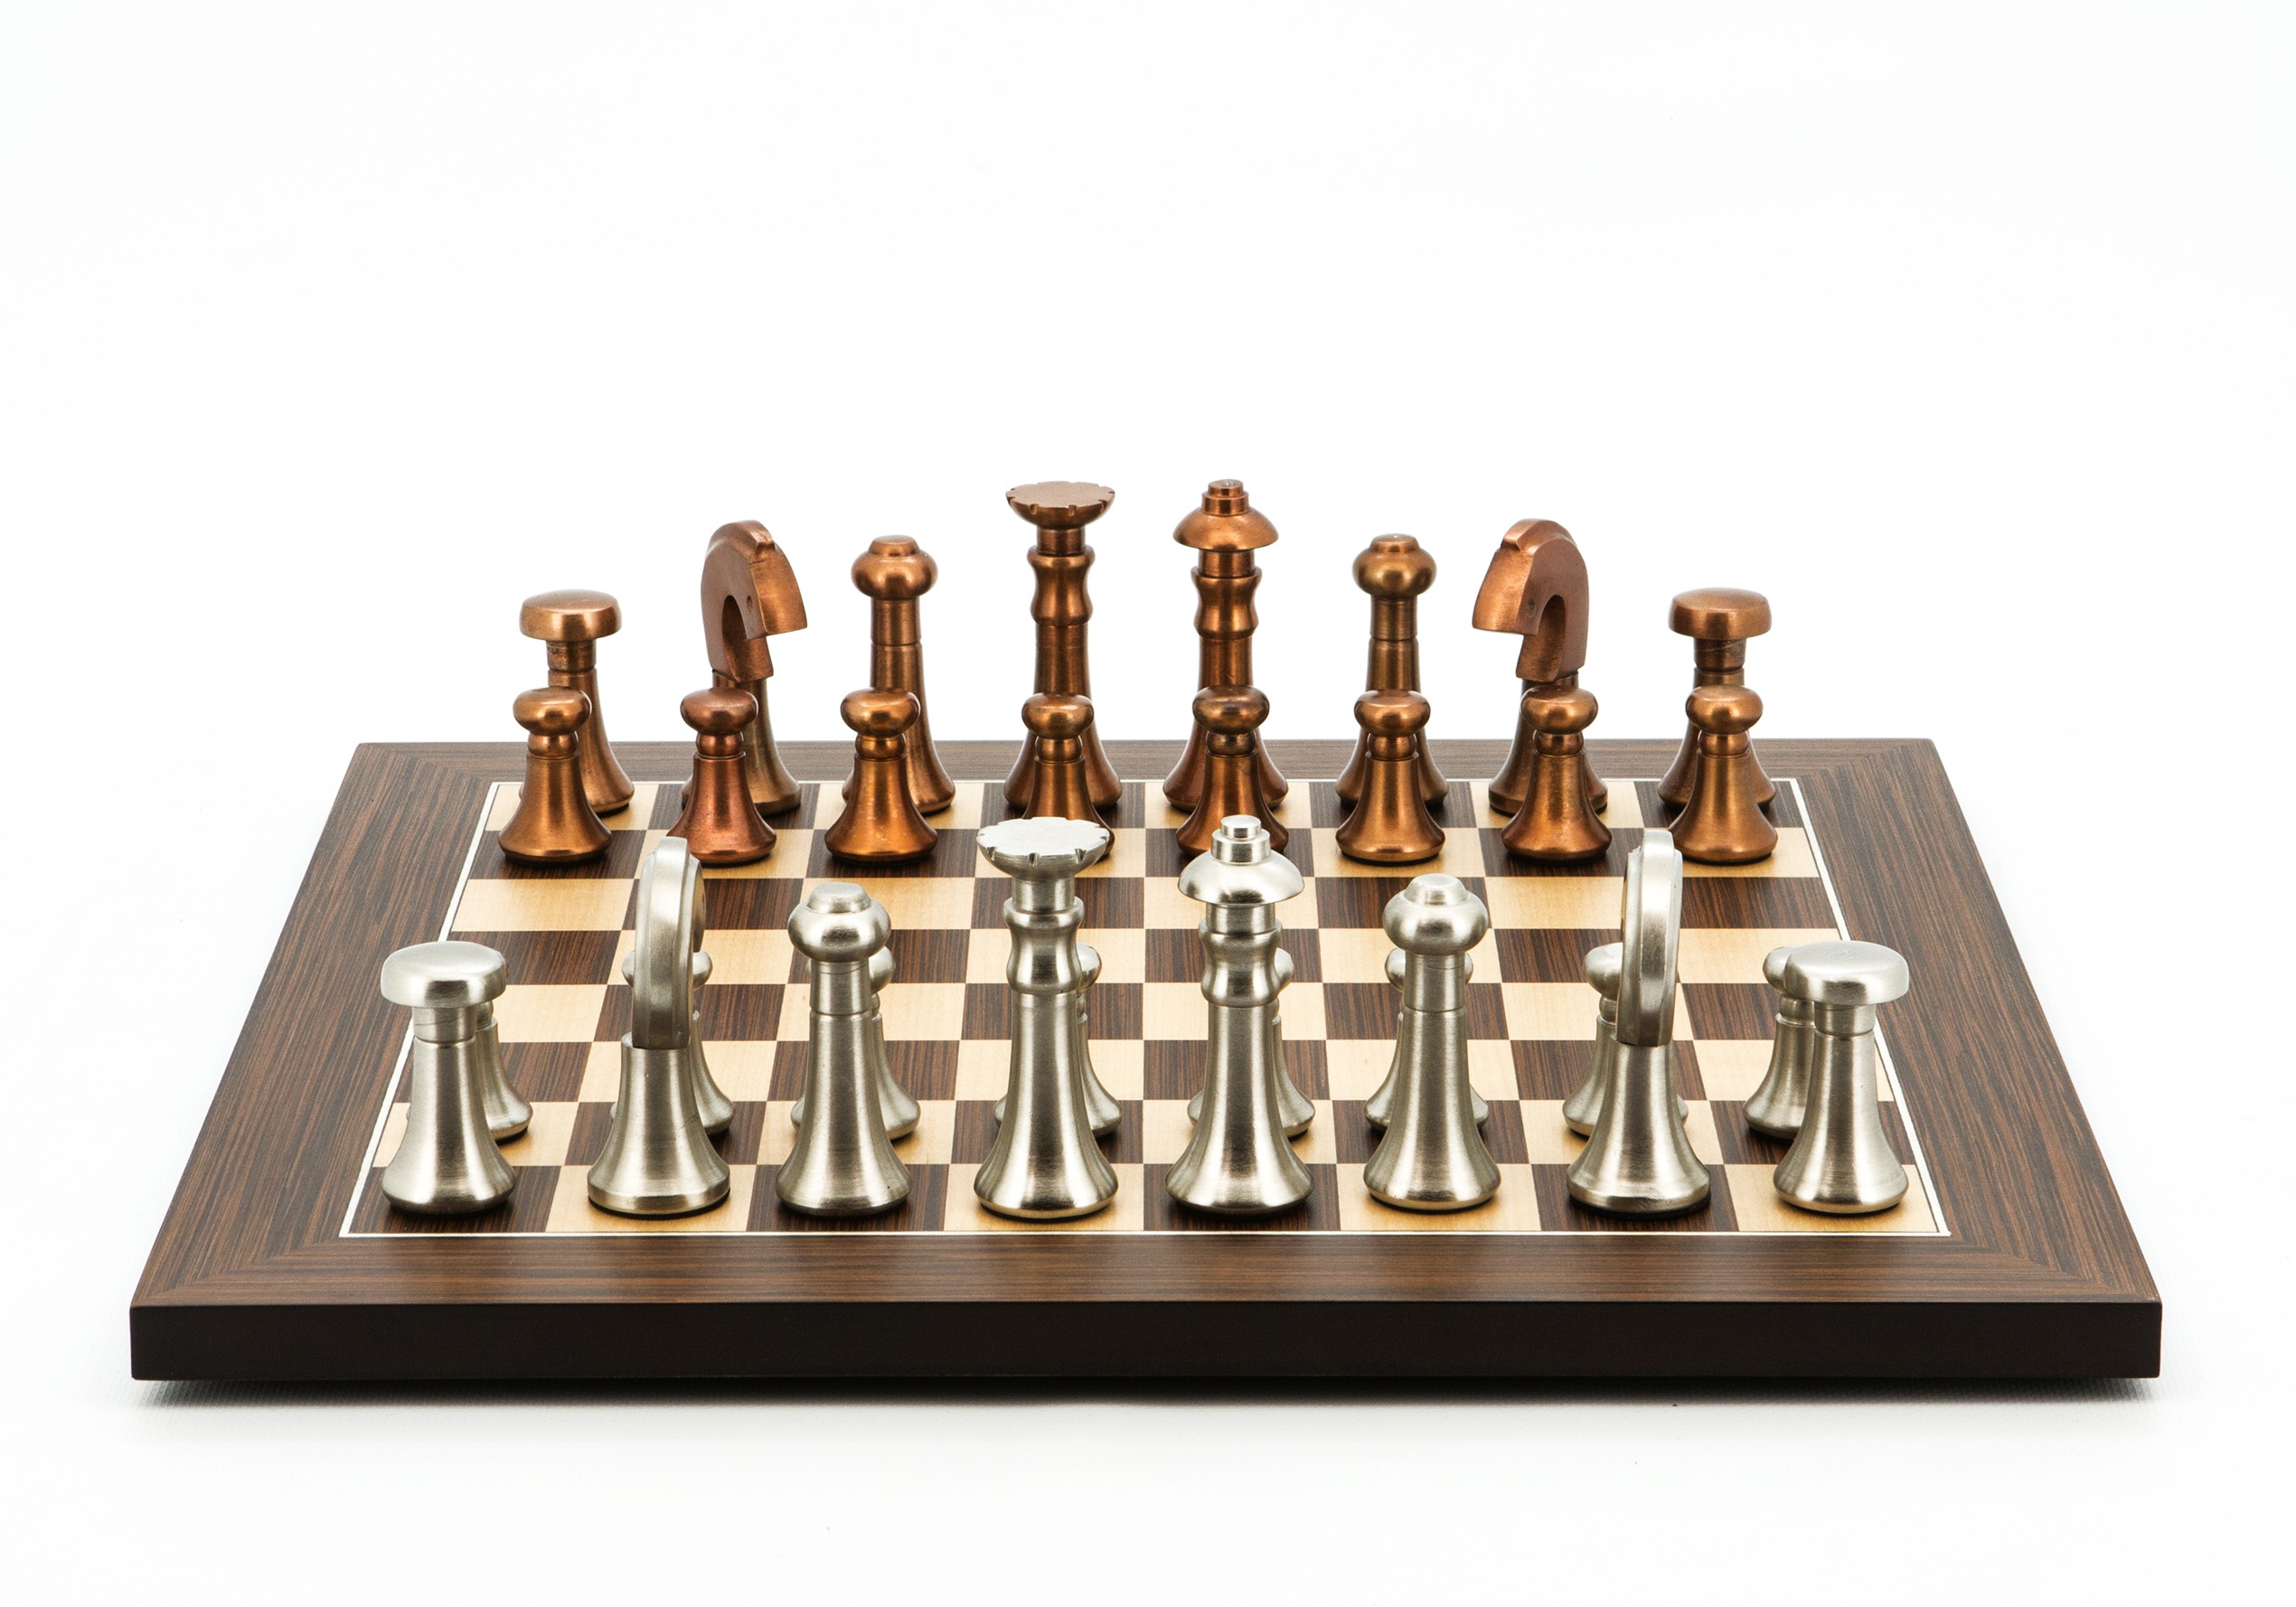 Dal Rossi Italy Chess Set Palisander / Maple Flat Board 40cm, With Metal Copper and silver Chessmen 80mm